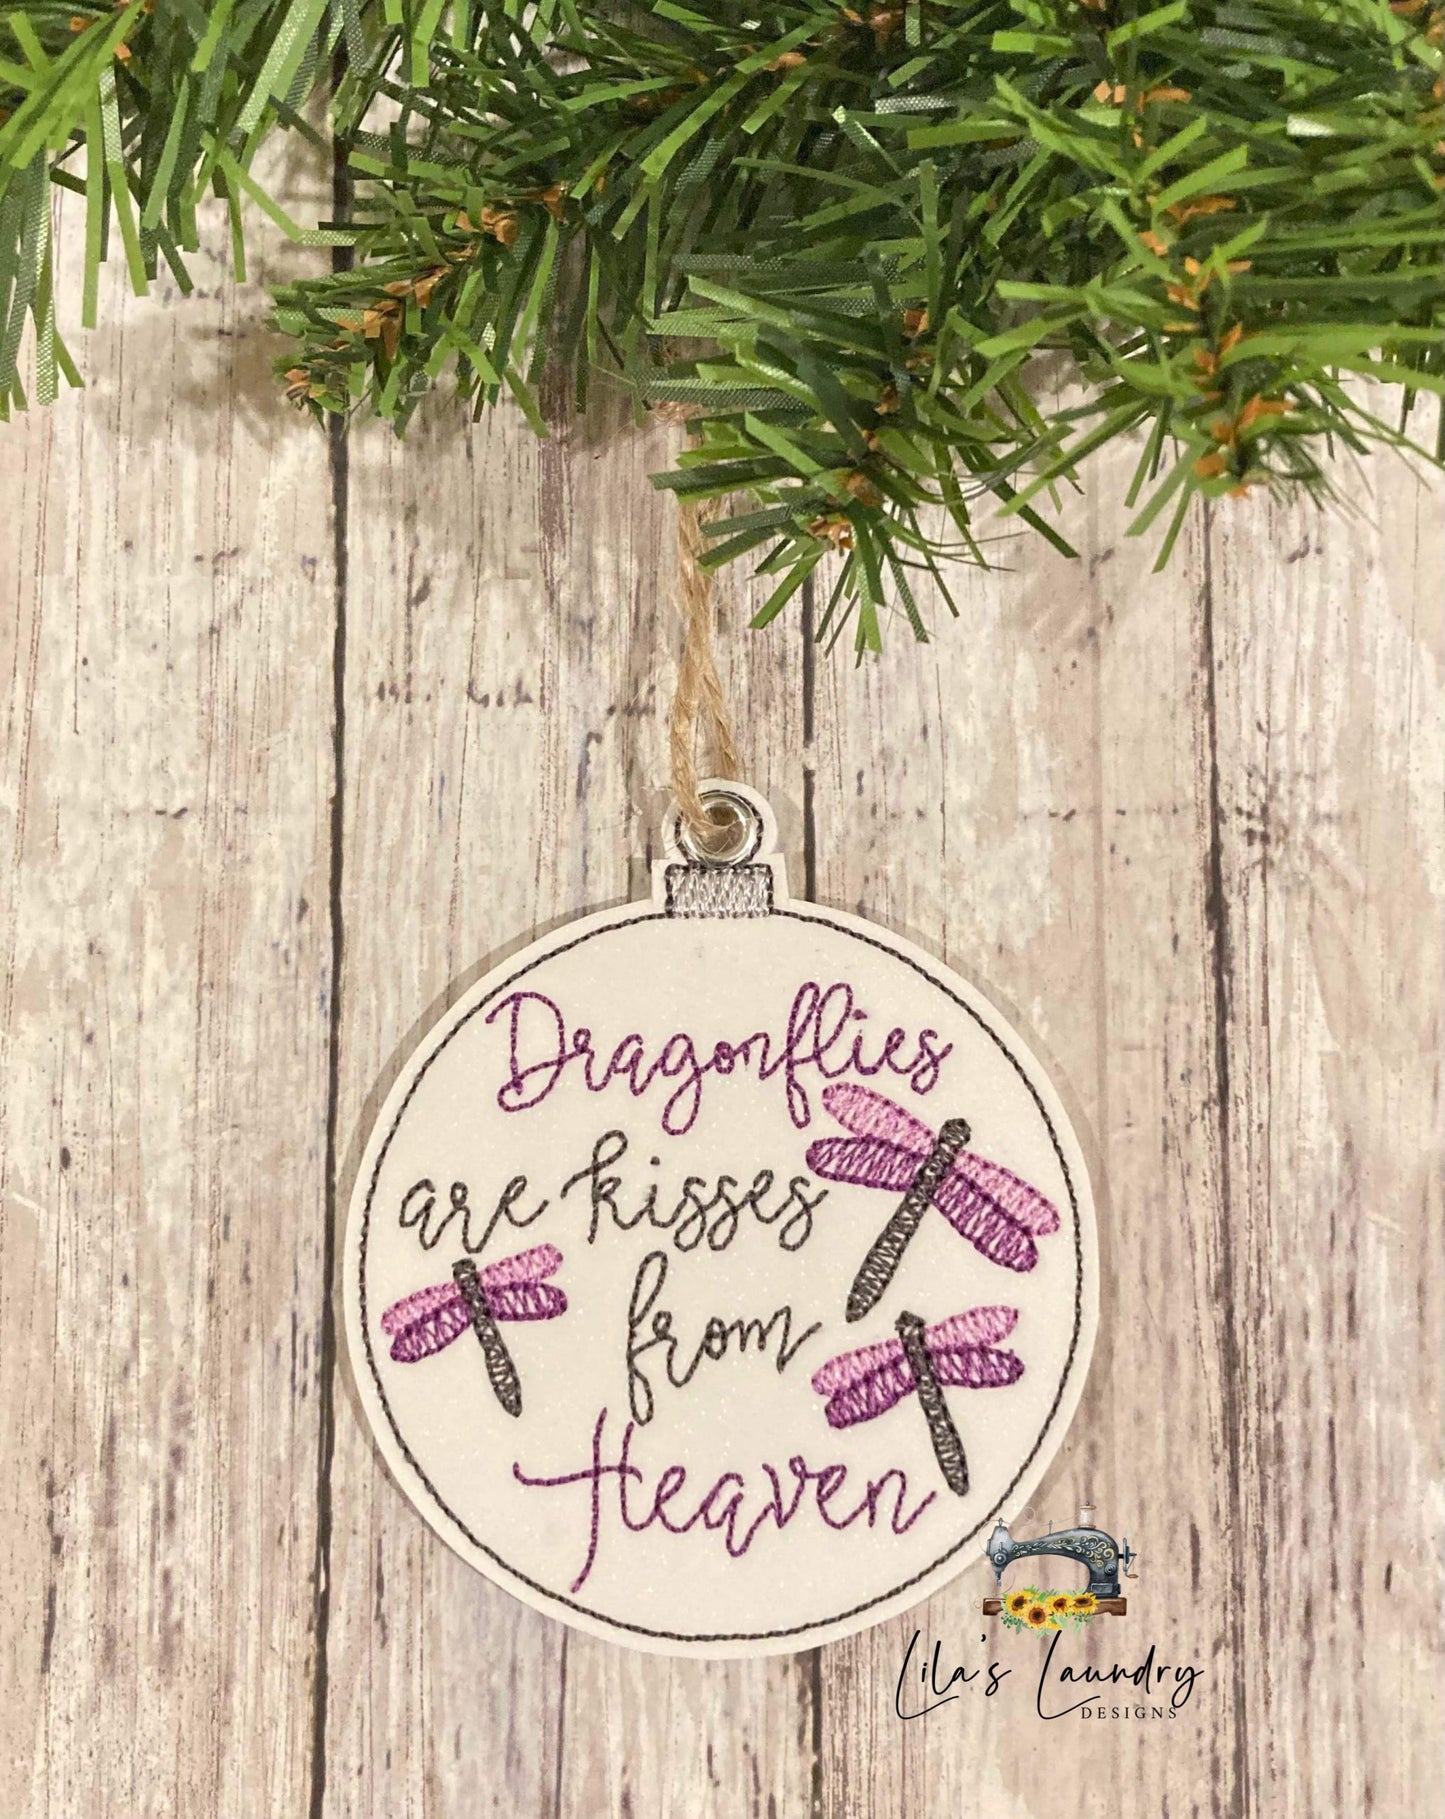 Kisses From Heaven Ornament - Digital Embroidery Design